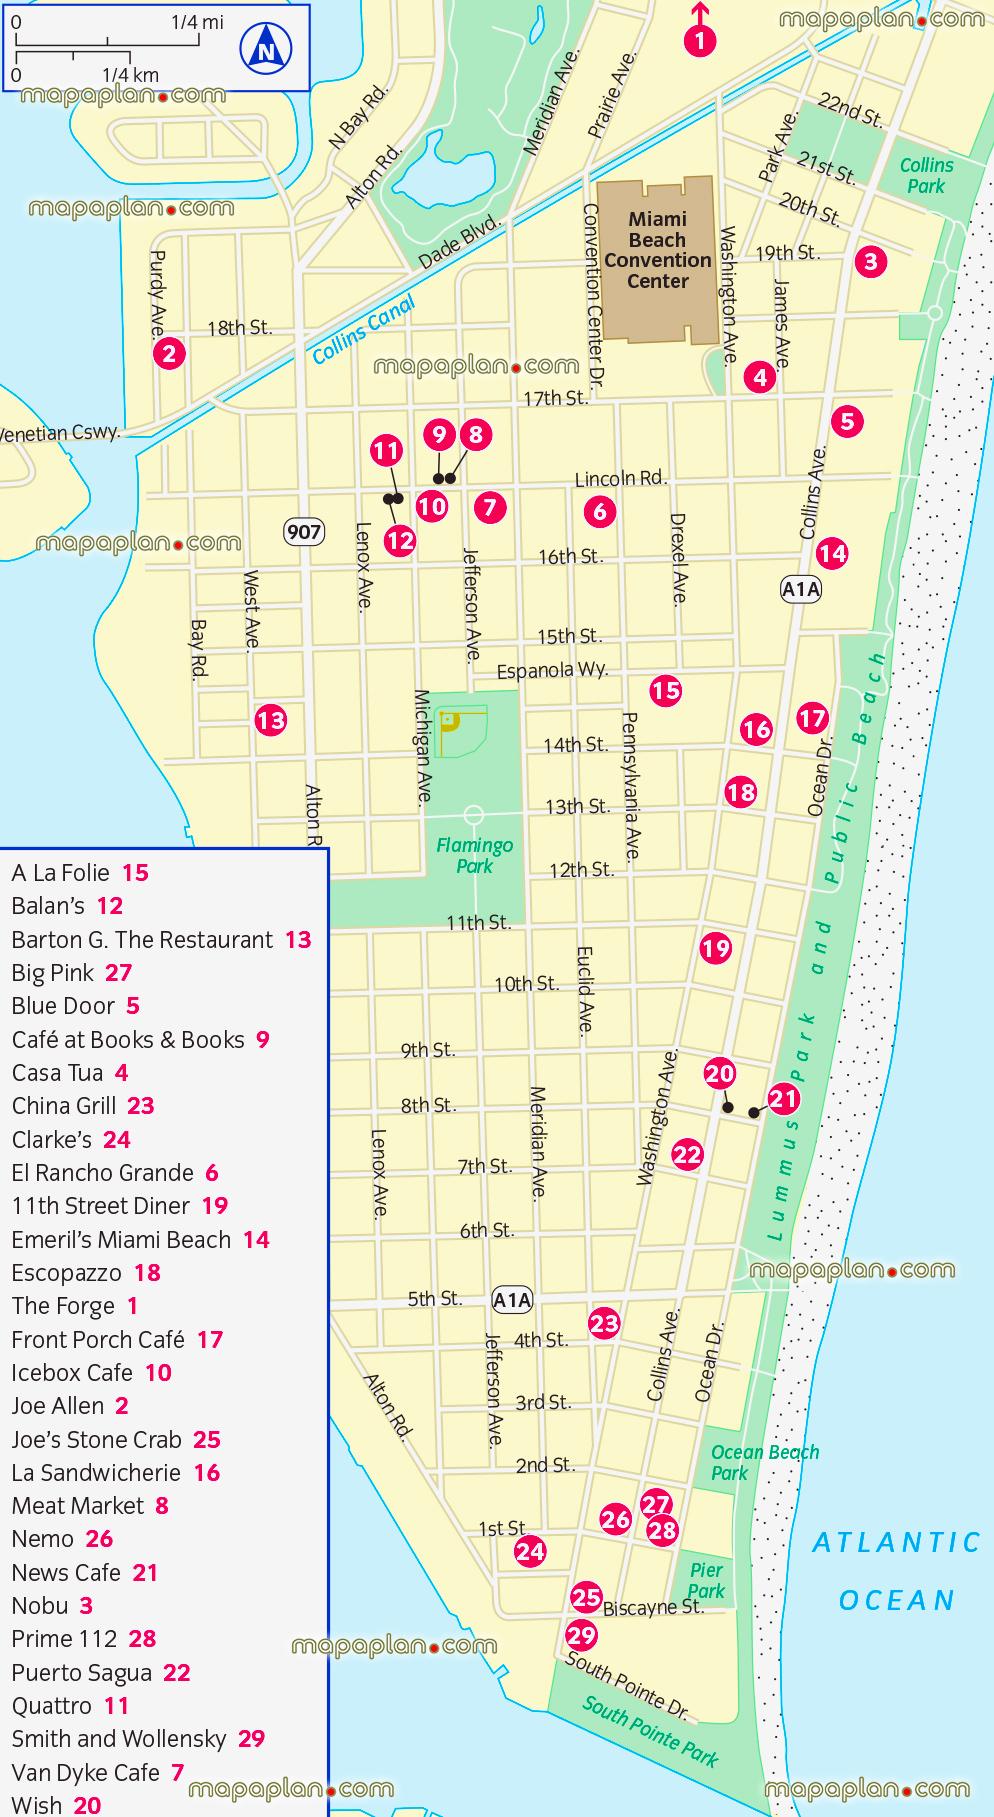 south beach dining restaurants food guide Miami top attractions highlights detailed itinerary popout interactive guide english